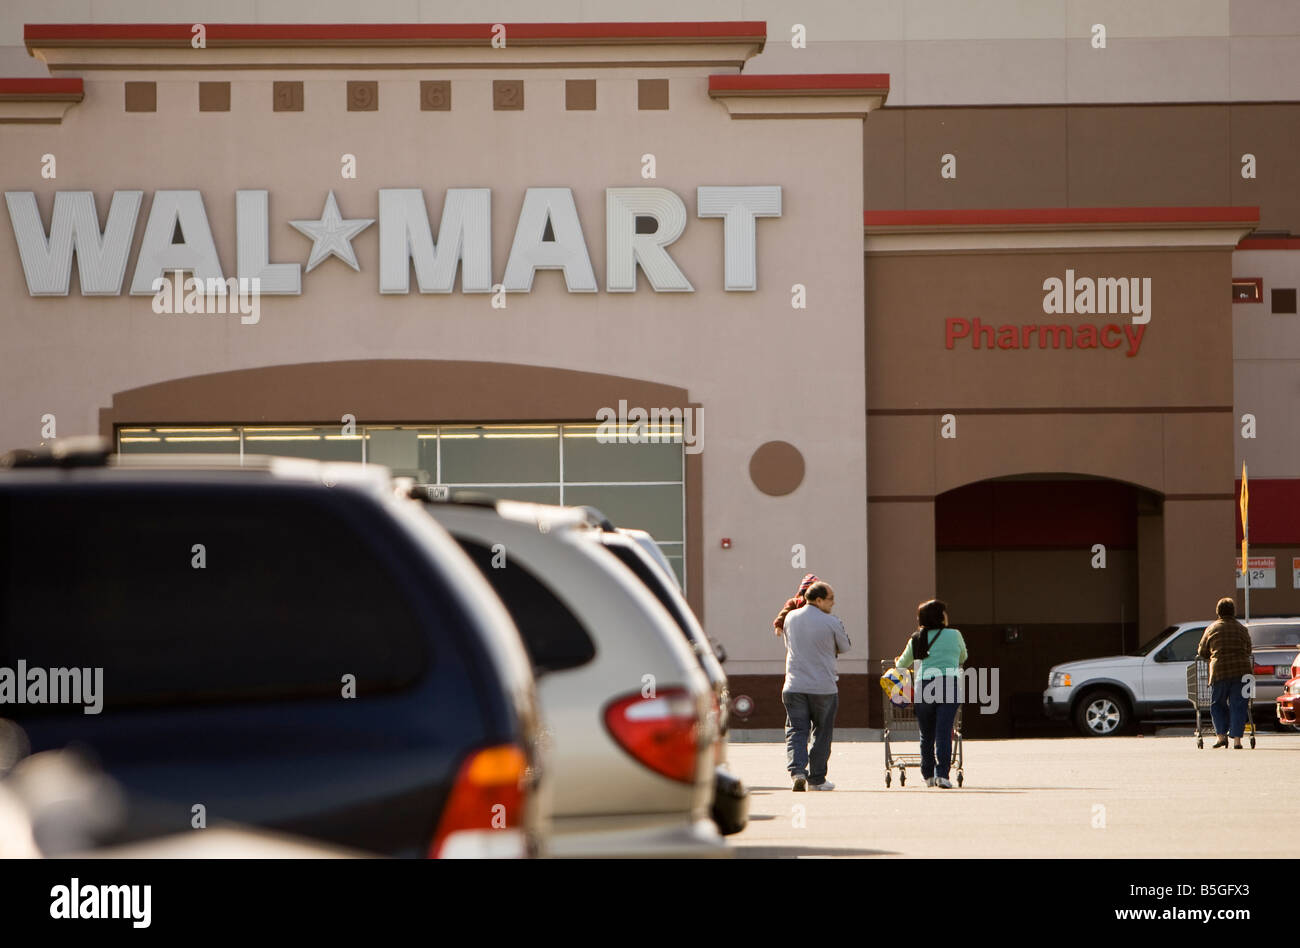 Shoppers at a Wal Mart store Stock Photo - Alamy